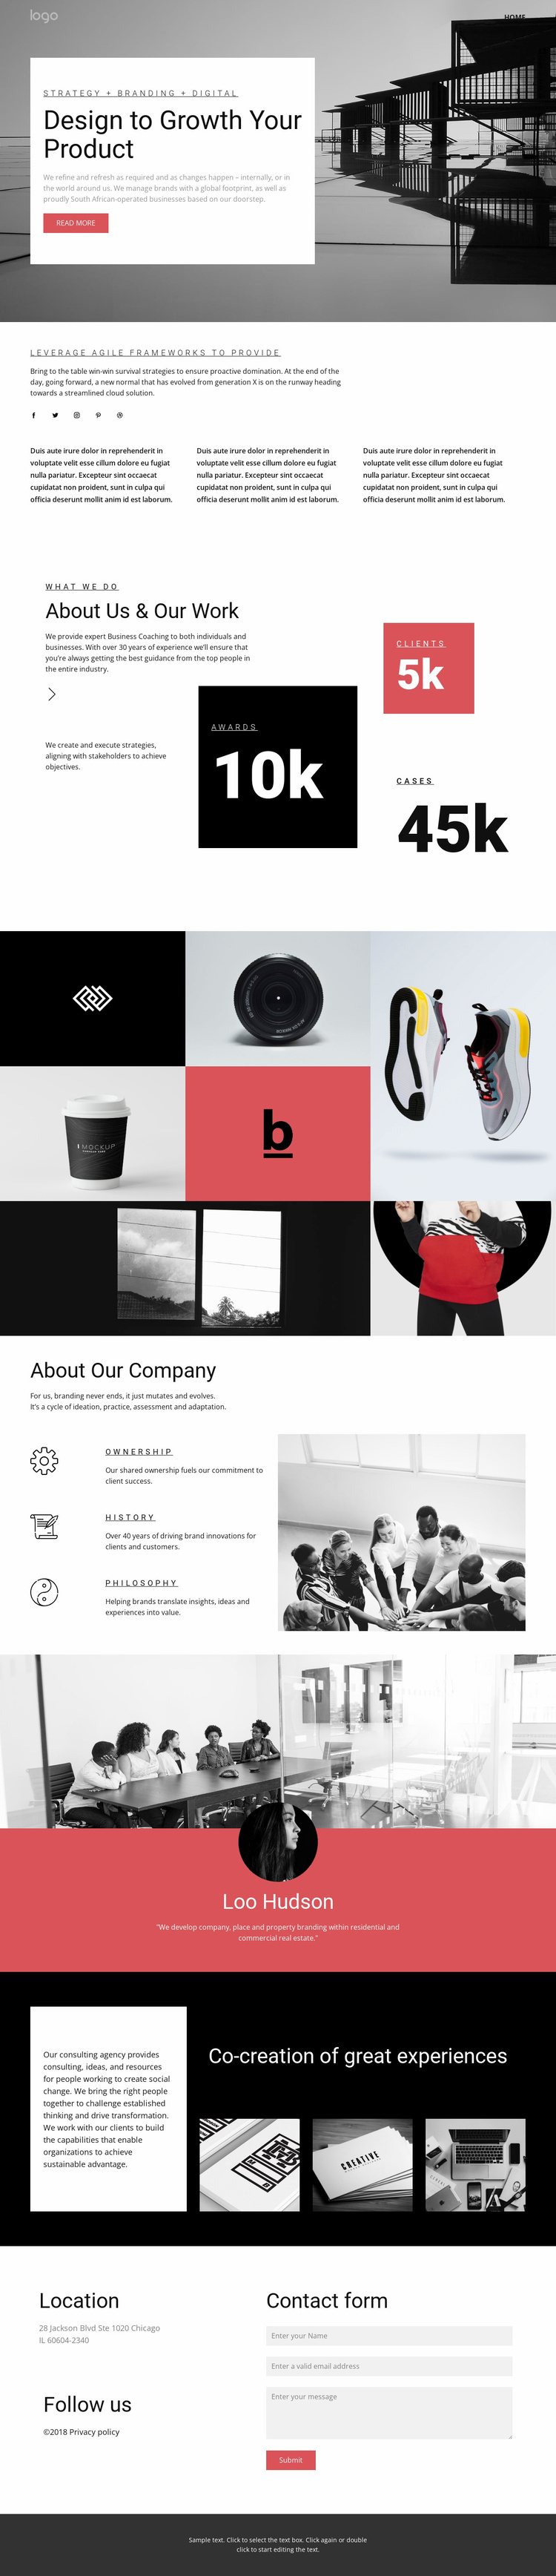 Business growth agency Landing Page